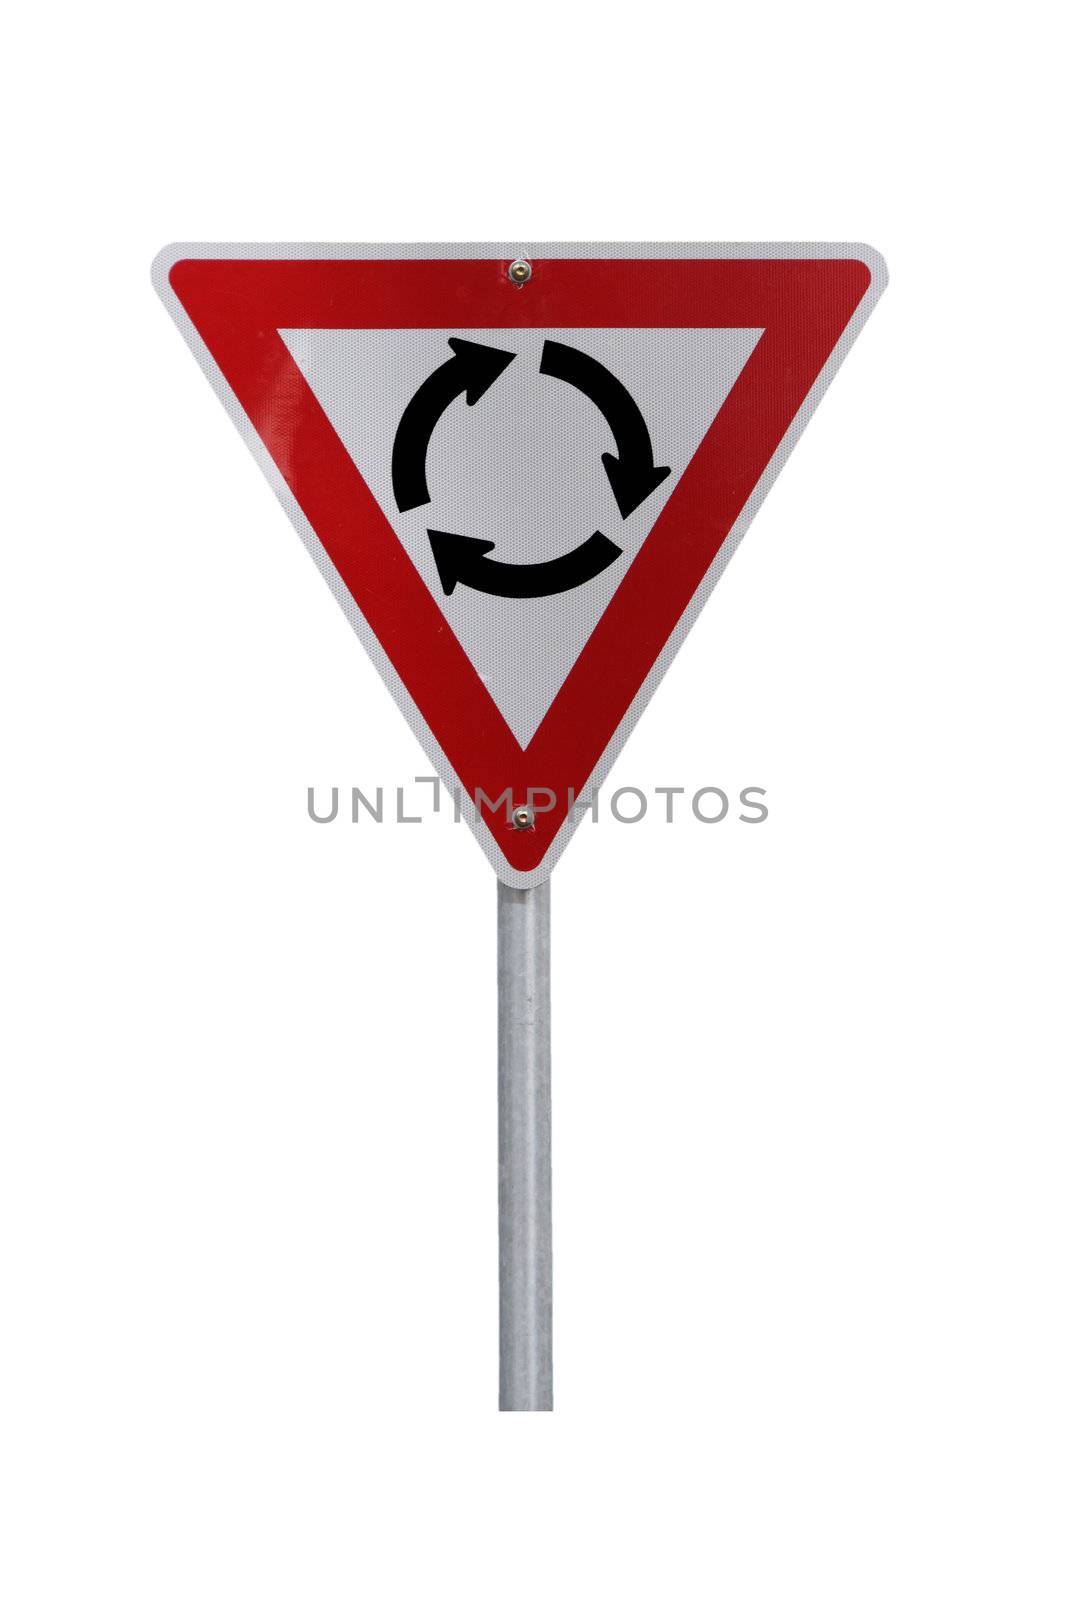 Roundabout Warning Sign - Current Australian Road Sign for left-hand traffic (reflective). Isolated on White